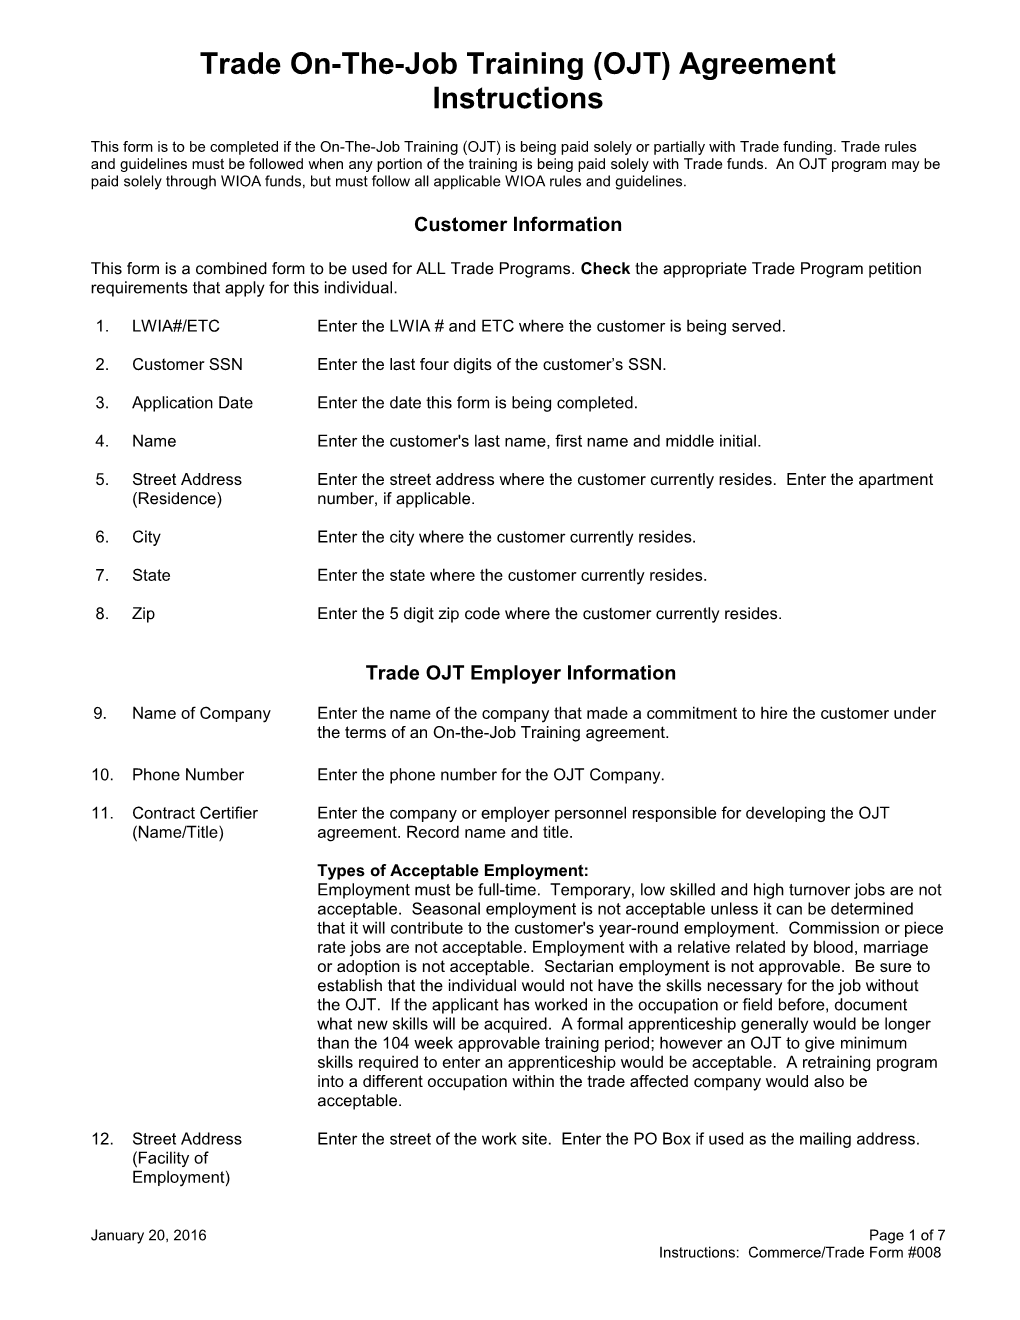 Form #008 Trade On-The-Job Training OJT Agreement Instructions (MS Word) 3-01-14